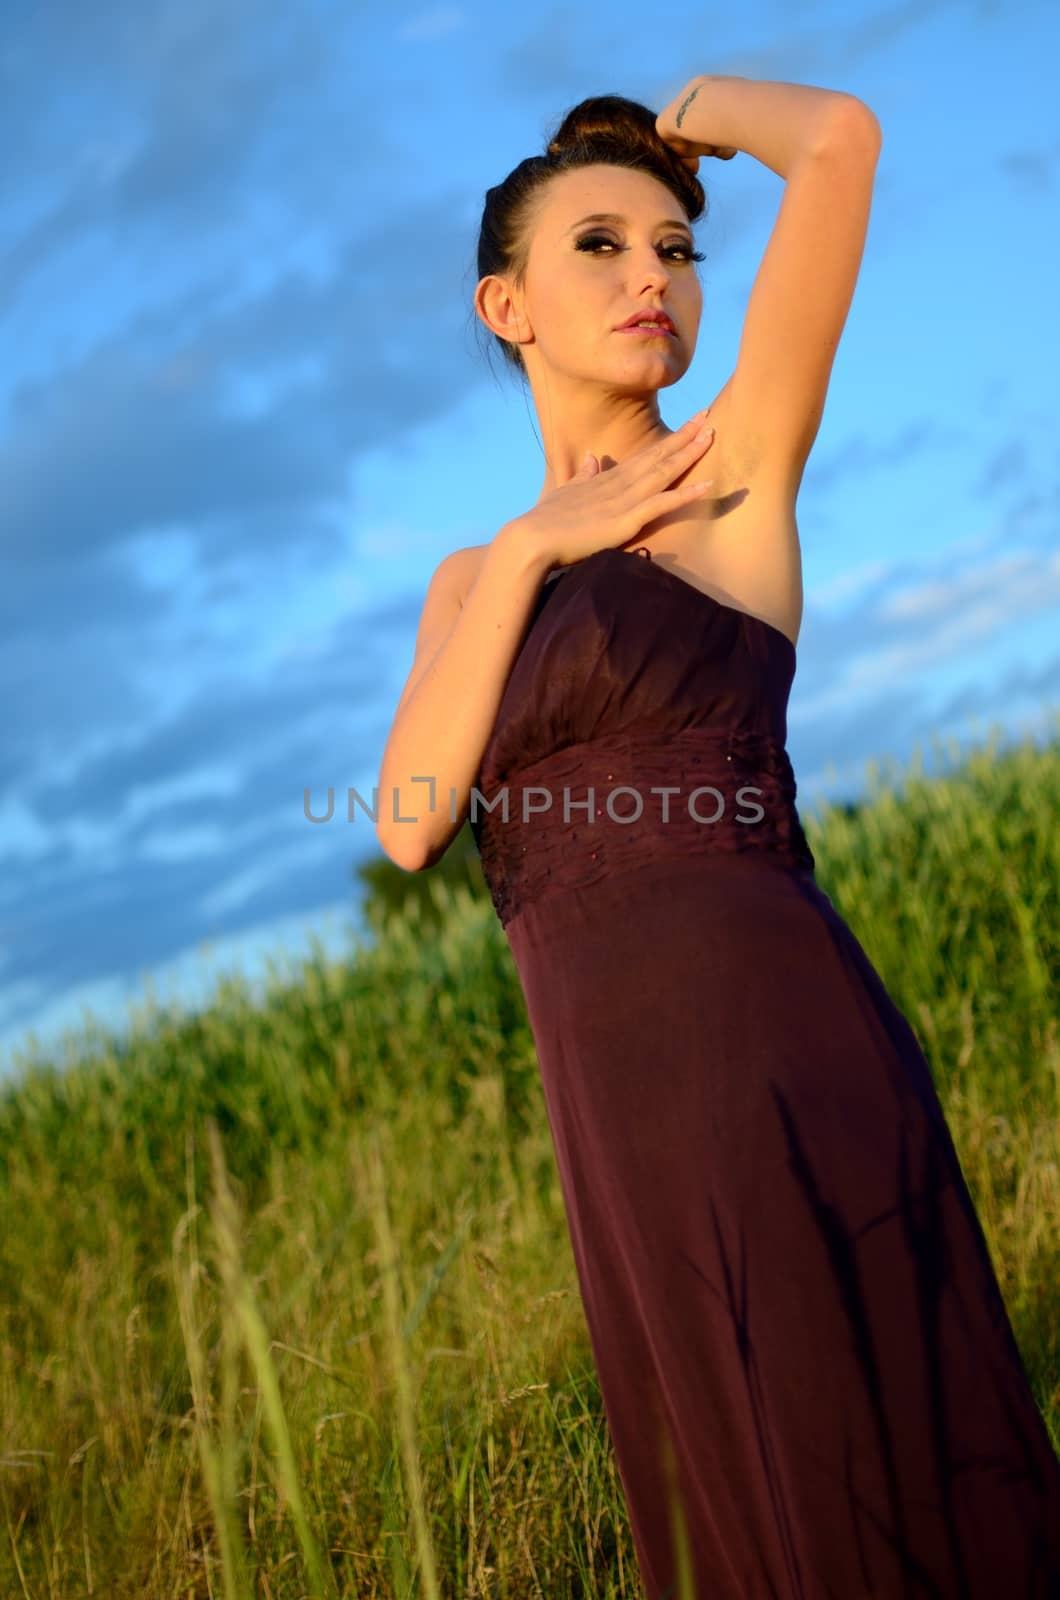 Beautiful girl from Poland, outdoor portrait. Young female model posing with different hands gesture. Blue sky with single clouds and green fields as background.